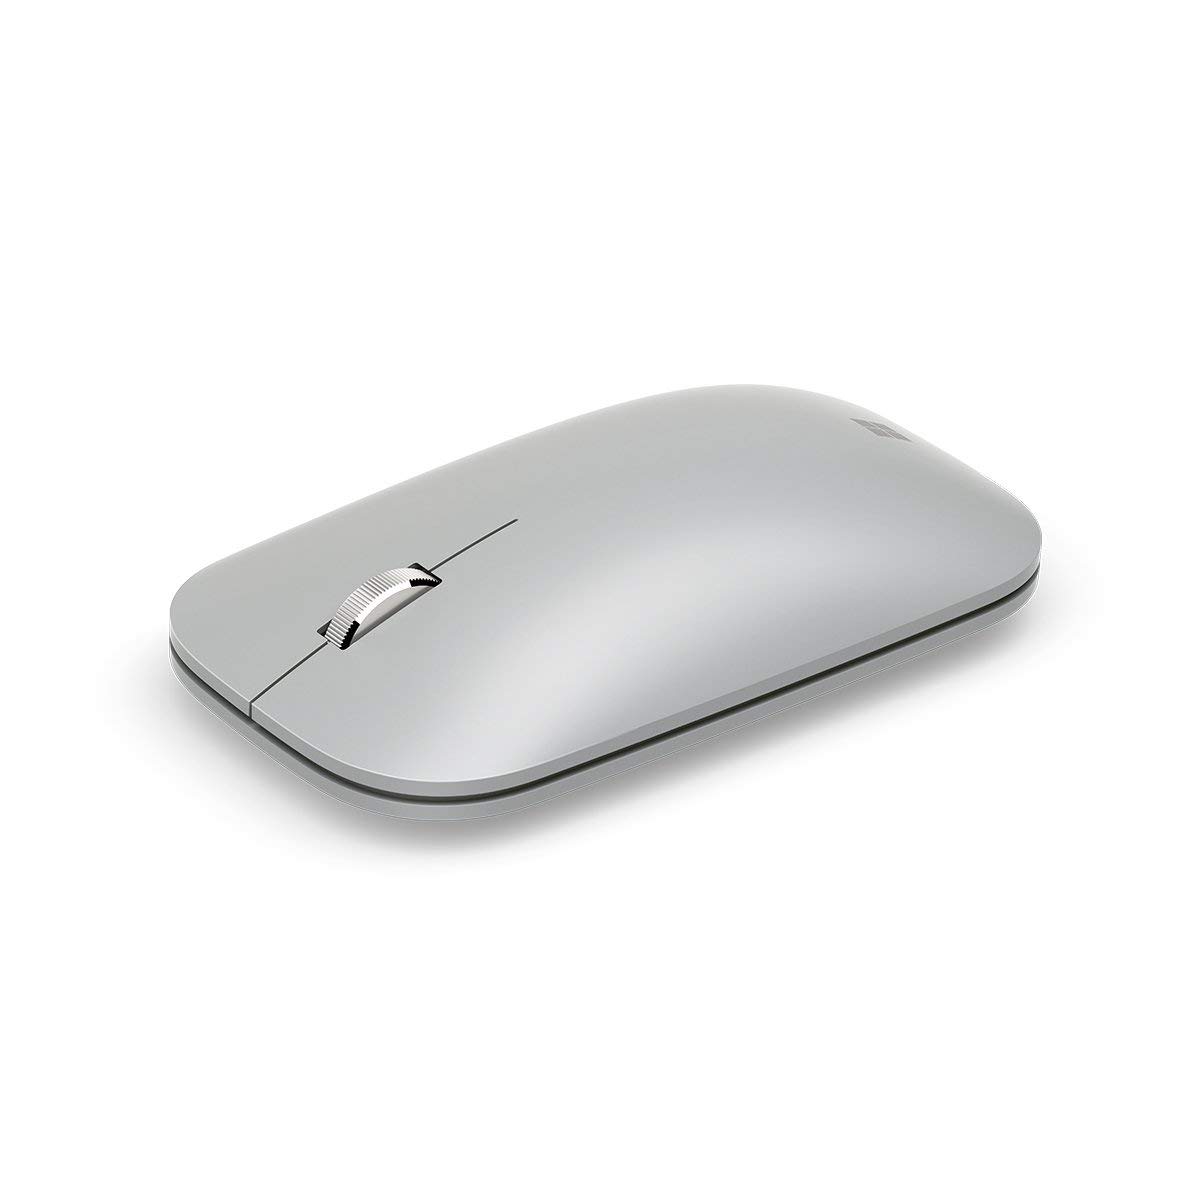 Microsoft Surface Mobile Mouse Bluetooth, Platinum - image 2 of 5